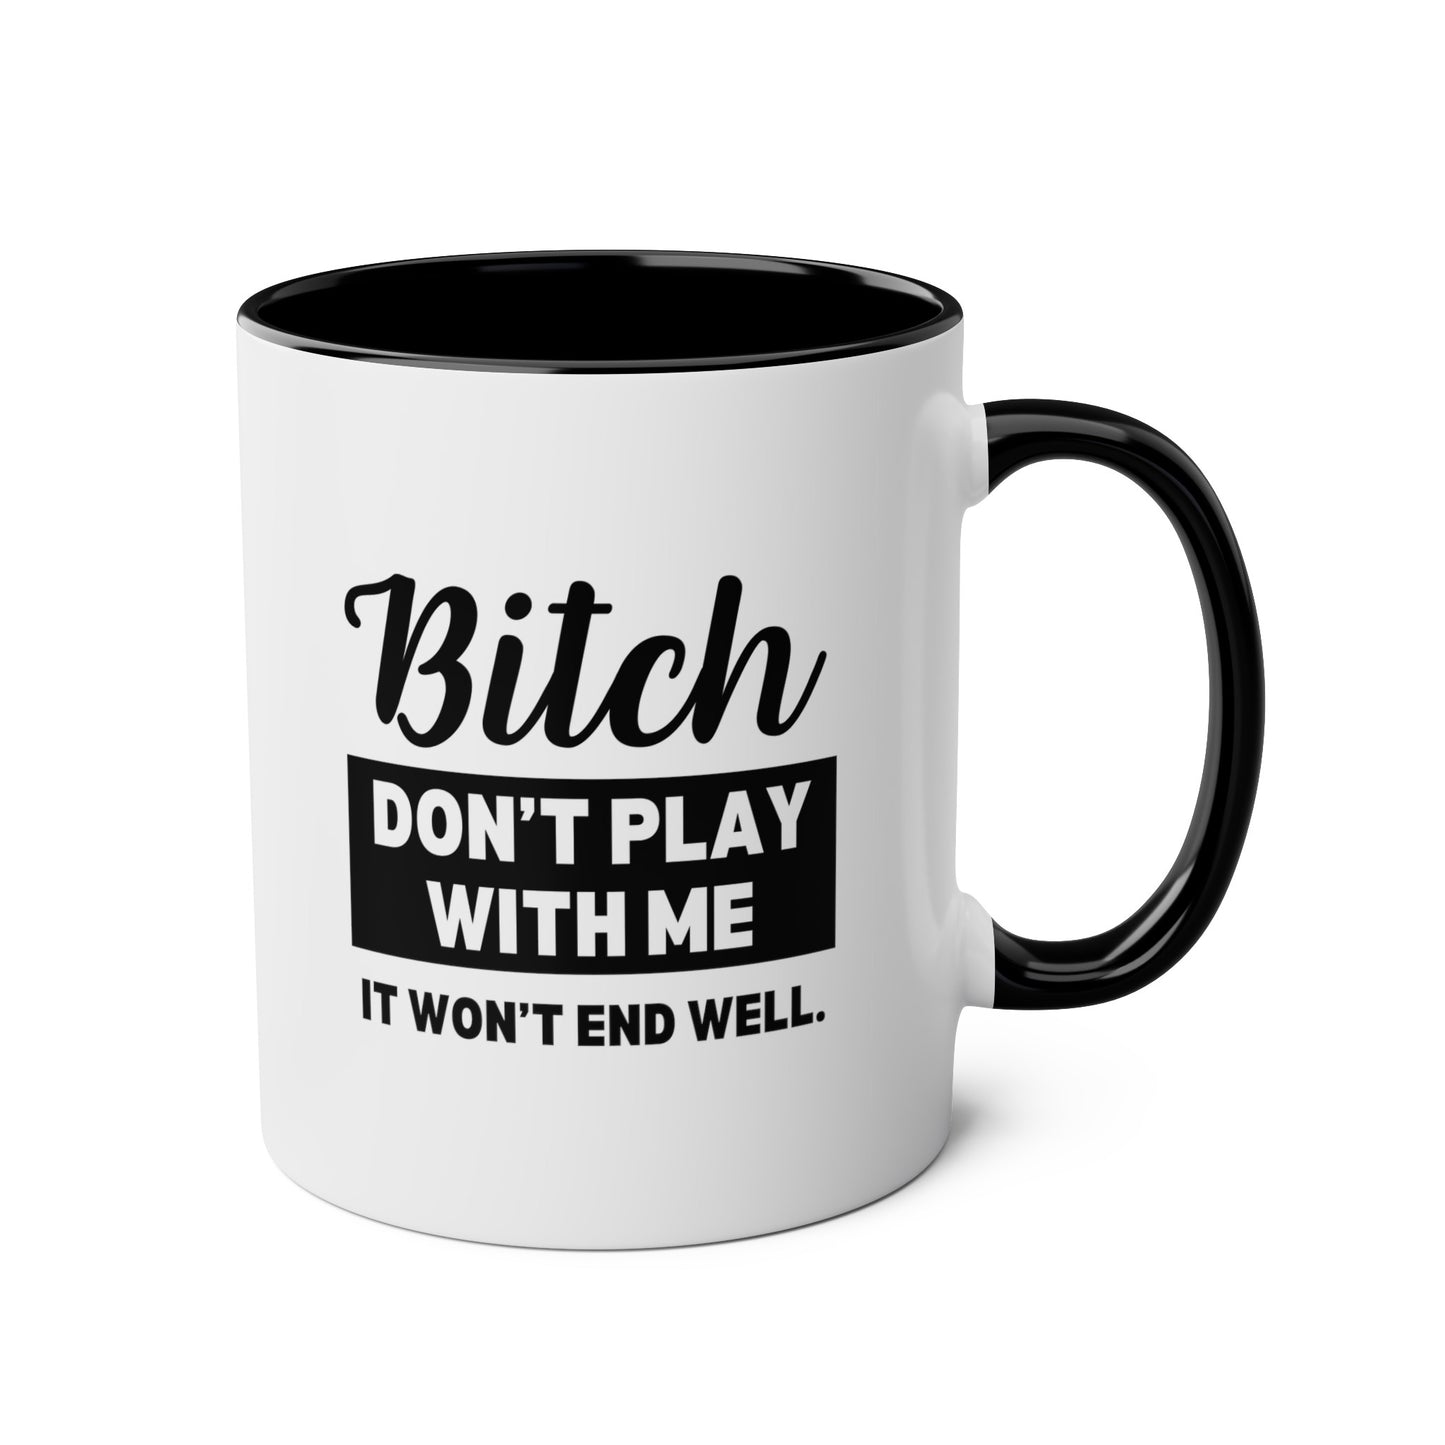 Bitch Don't Play With Me It Won't End Well 11oz white with black accent funny coffee mug tea cup gift for friend sarcastic sarcasm curse cuss rude novelty waveywares wavey wares wavywares wavy wares		